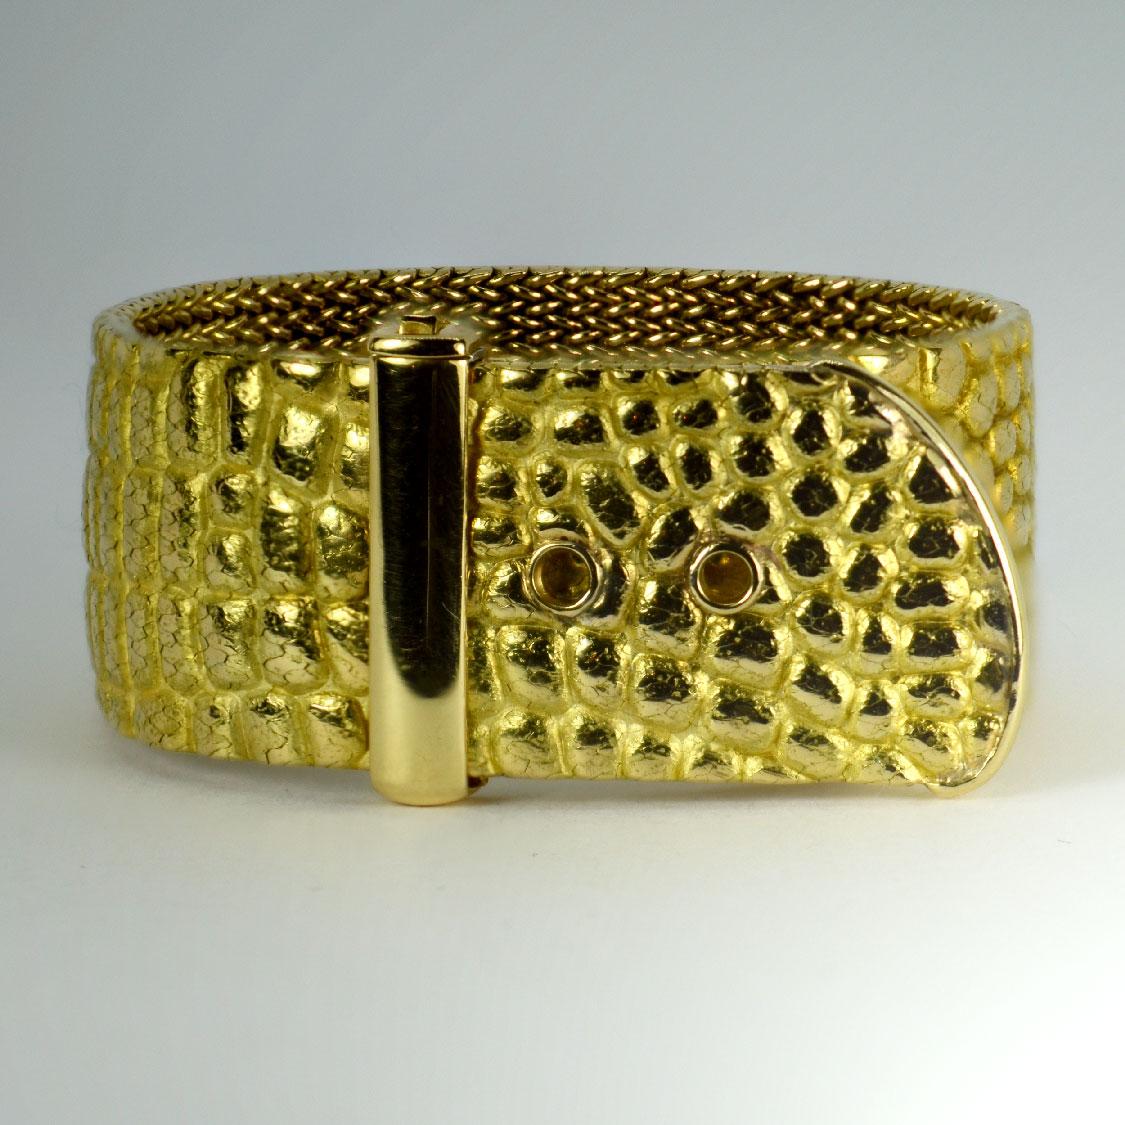 An 18 karat (18K) yellow gold bracelet by Angela Cummings for Tiffany & Co designed as a crocodile skin strap with buckle closure. The articulated crocodile skin is extremely finely crafted with a mesh base to allow movement. Signed ‘Cummings’ and